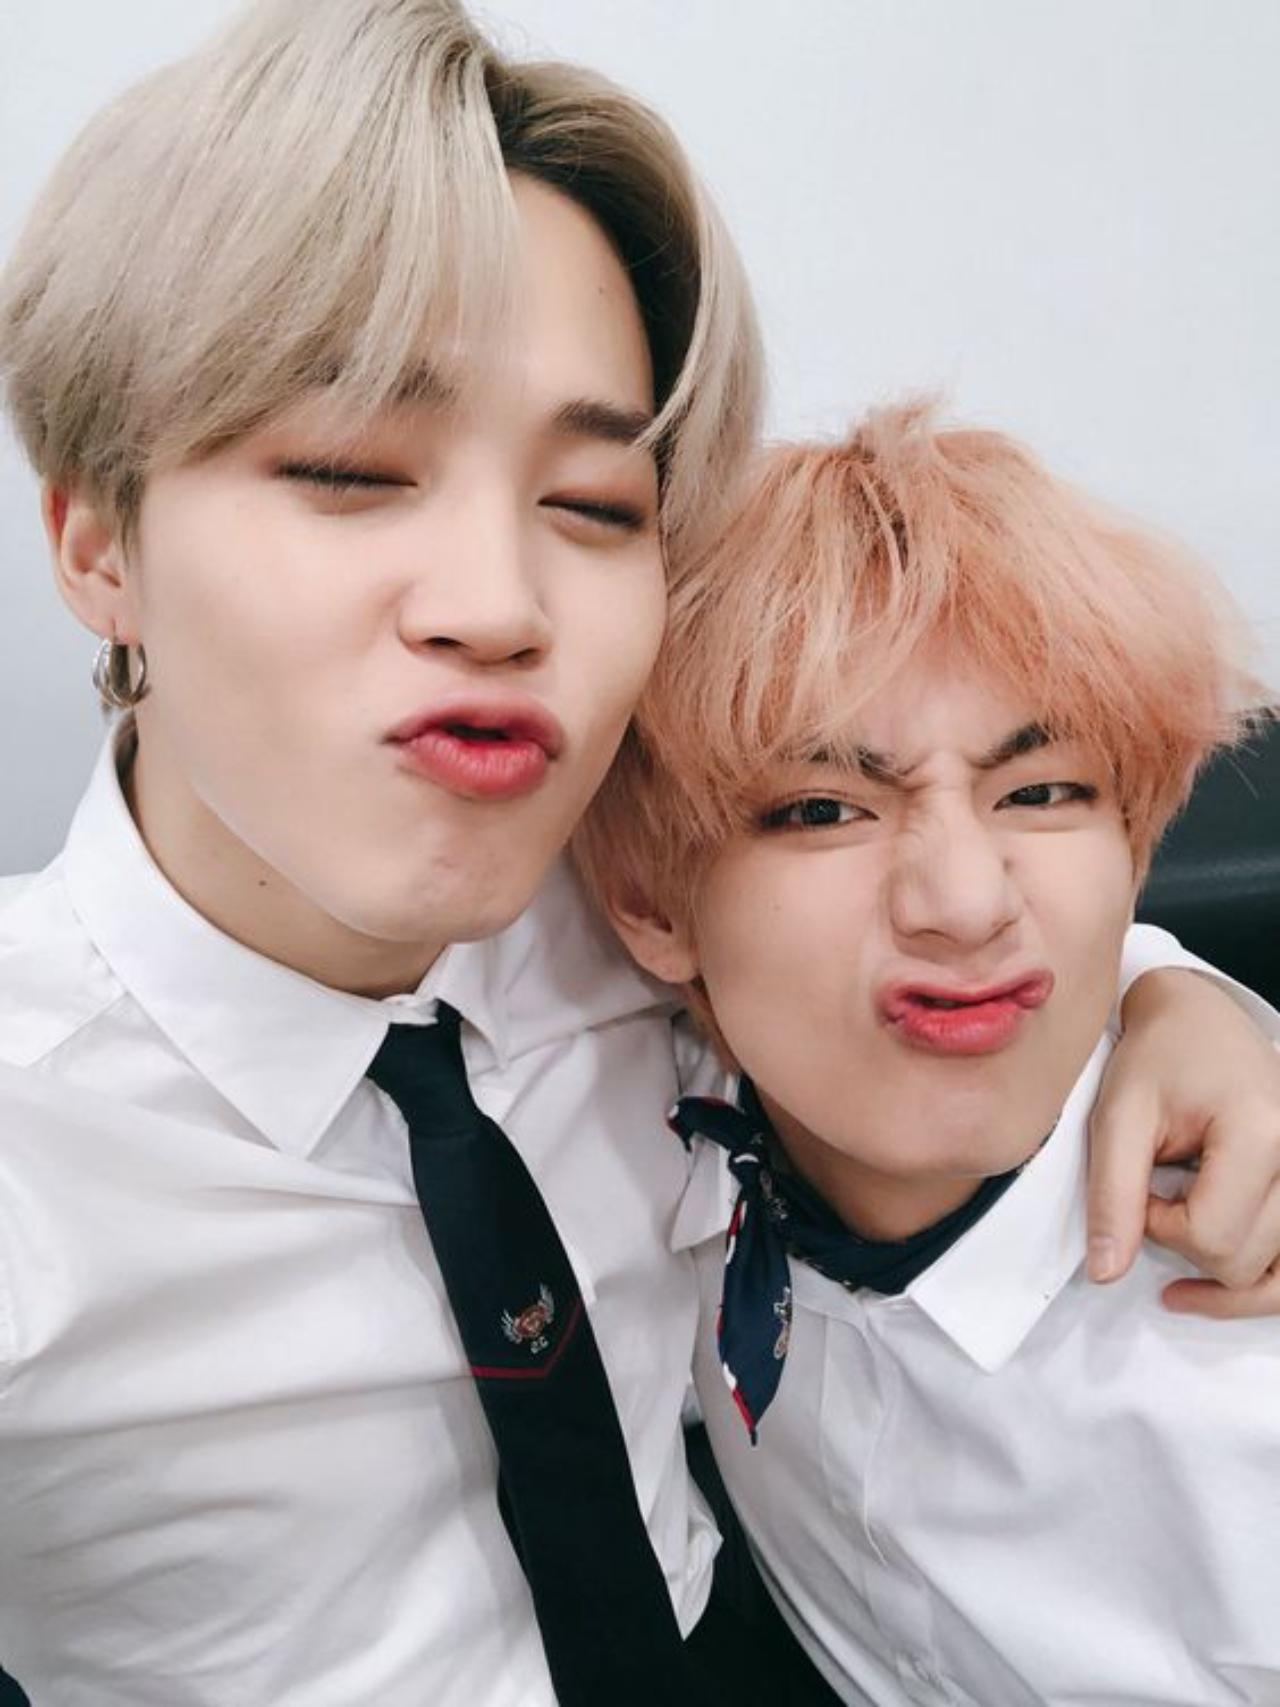 The '95 liner Taehyung and Jimin friendship is legendary amongst Korean fandoms. The two have been inseparable since the beginning of their trainee days. Born in the same year, they could drop honorifics and speak comfortably with each other. Taehyung wrote a song for Jimin called '4 'o clock' - a track that expressed their late night conversations and consolations, an homage to their enduring friendship